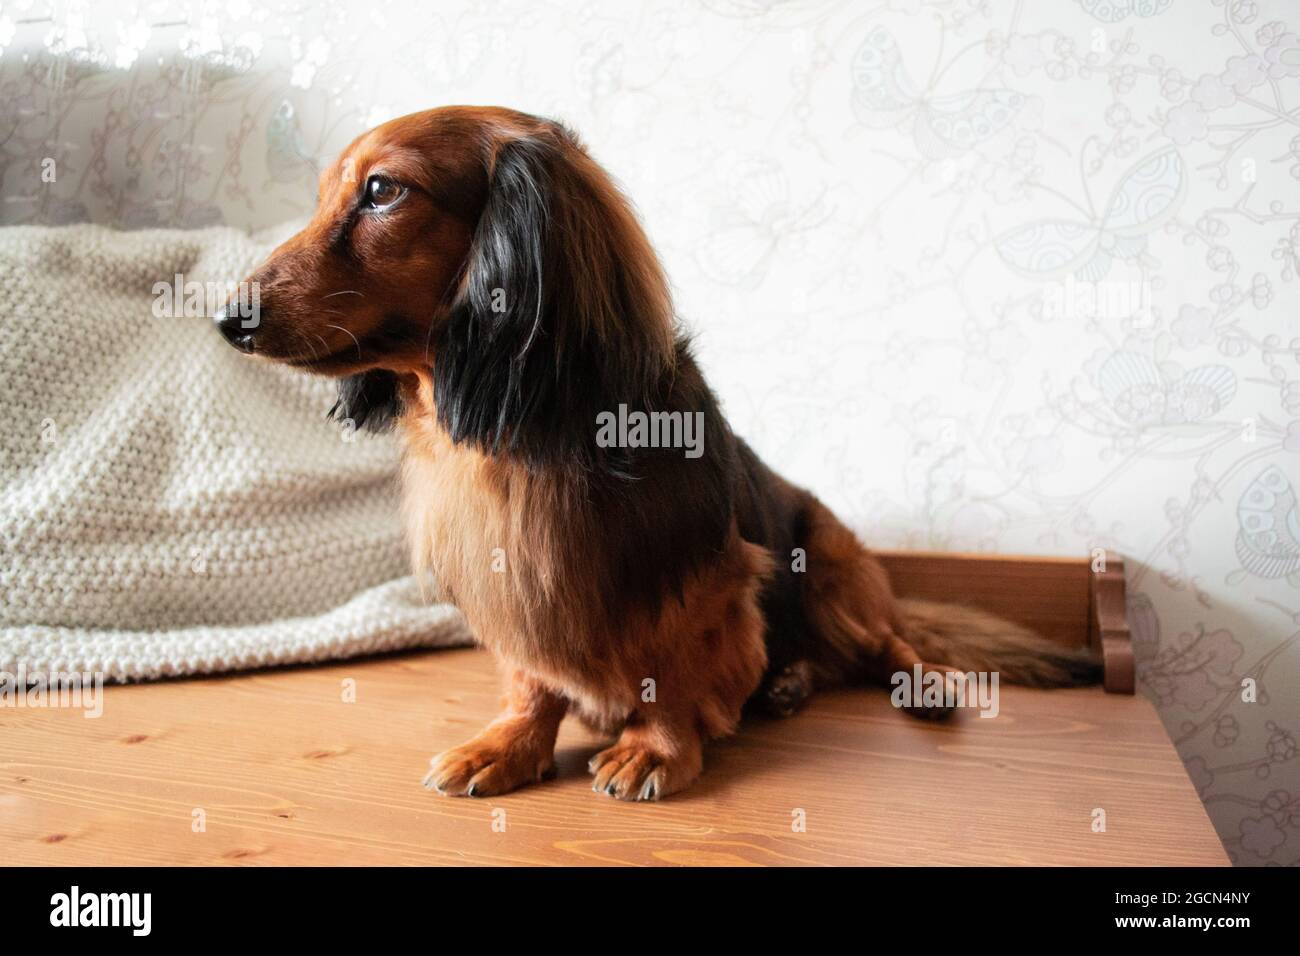 Full-length portrait of well-groomed long-haired dachshund red and black color, brown eyes, adorable black nose. Stock Photo